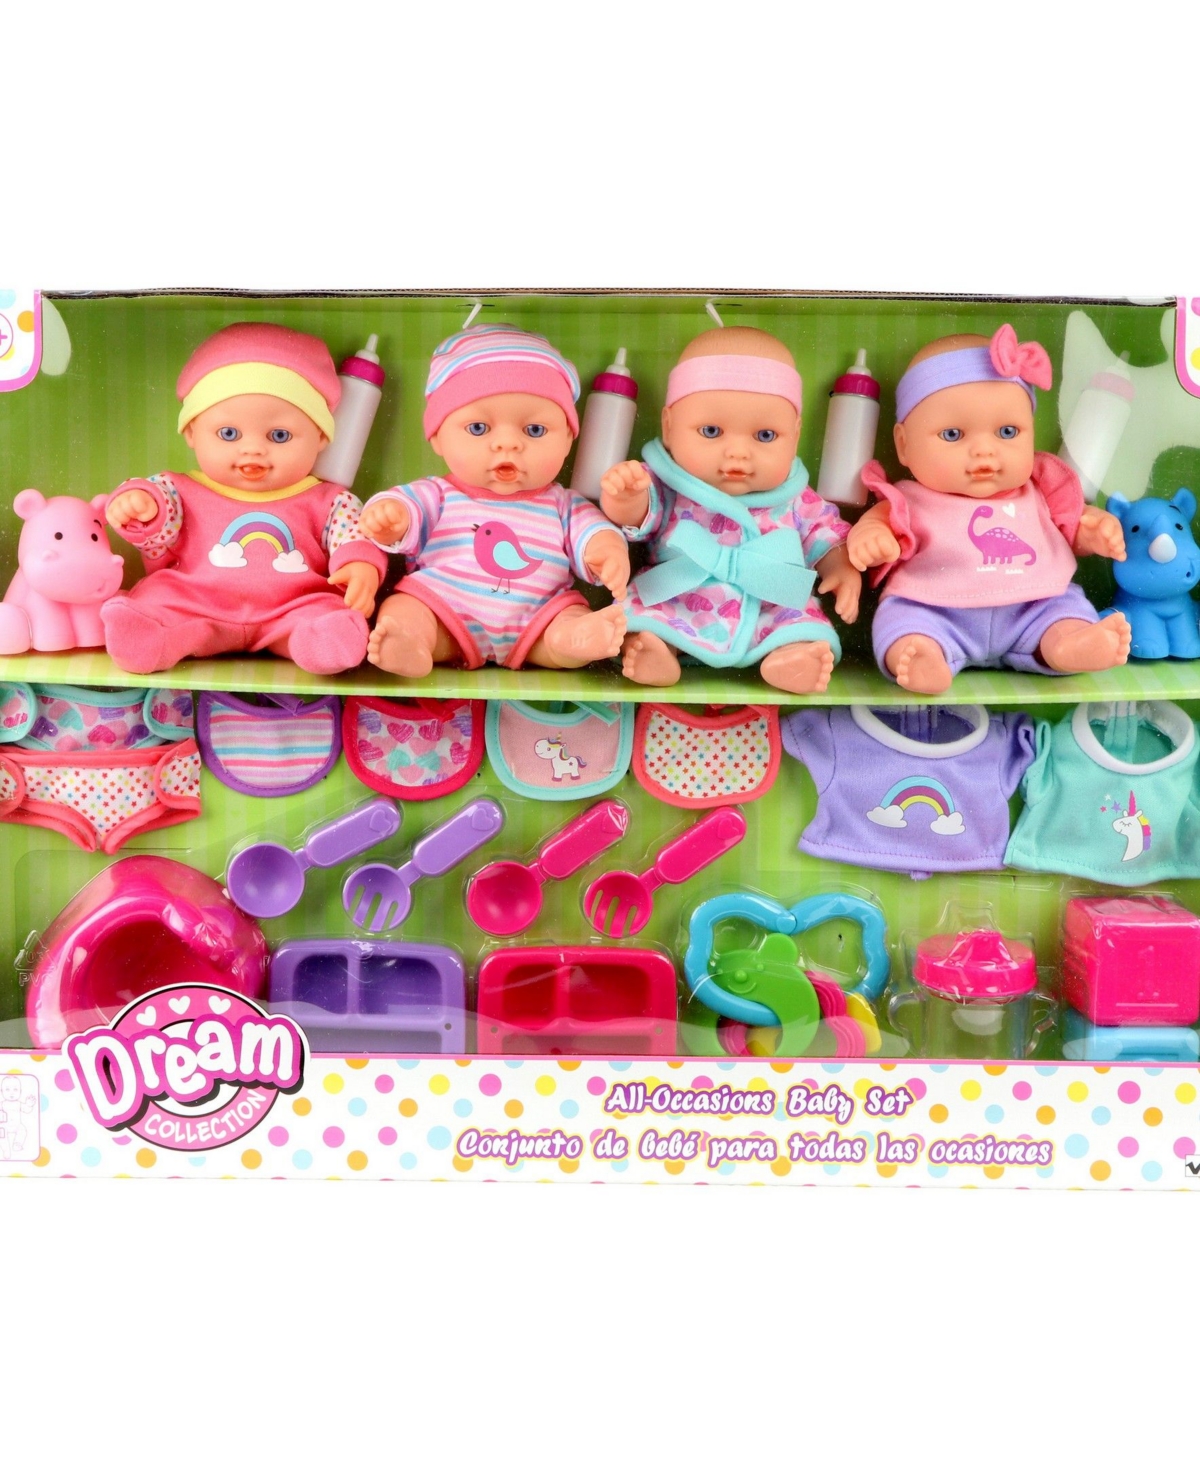 Redbox Dream Collection 7" All-occasions Baby Doll Set In Multi